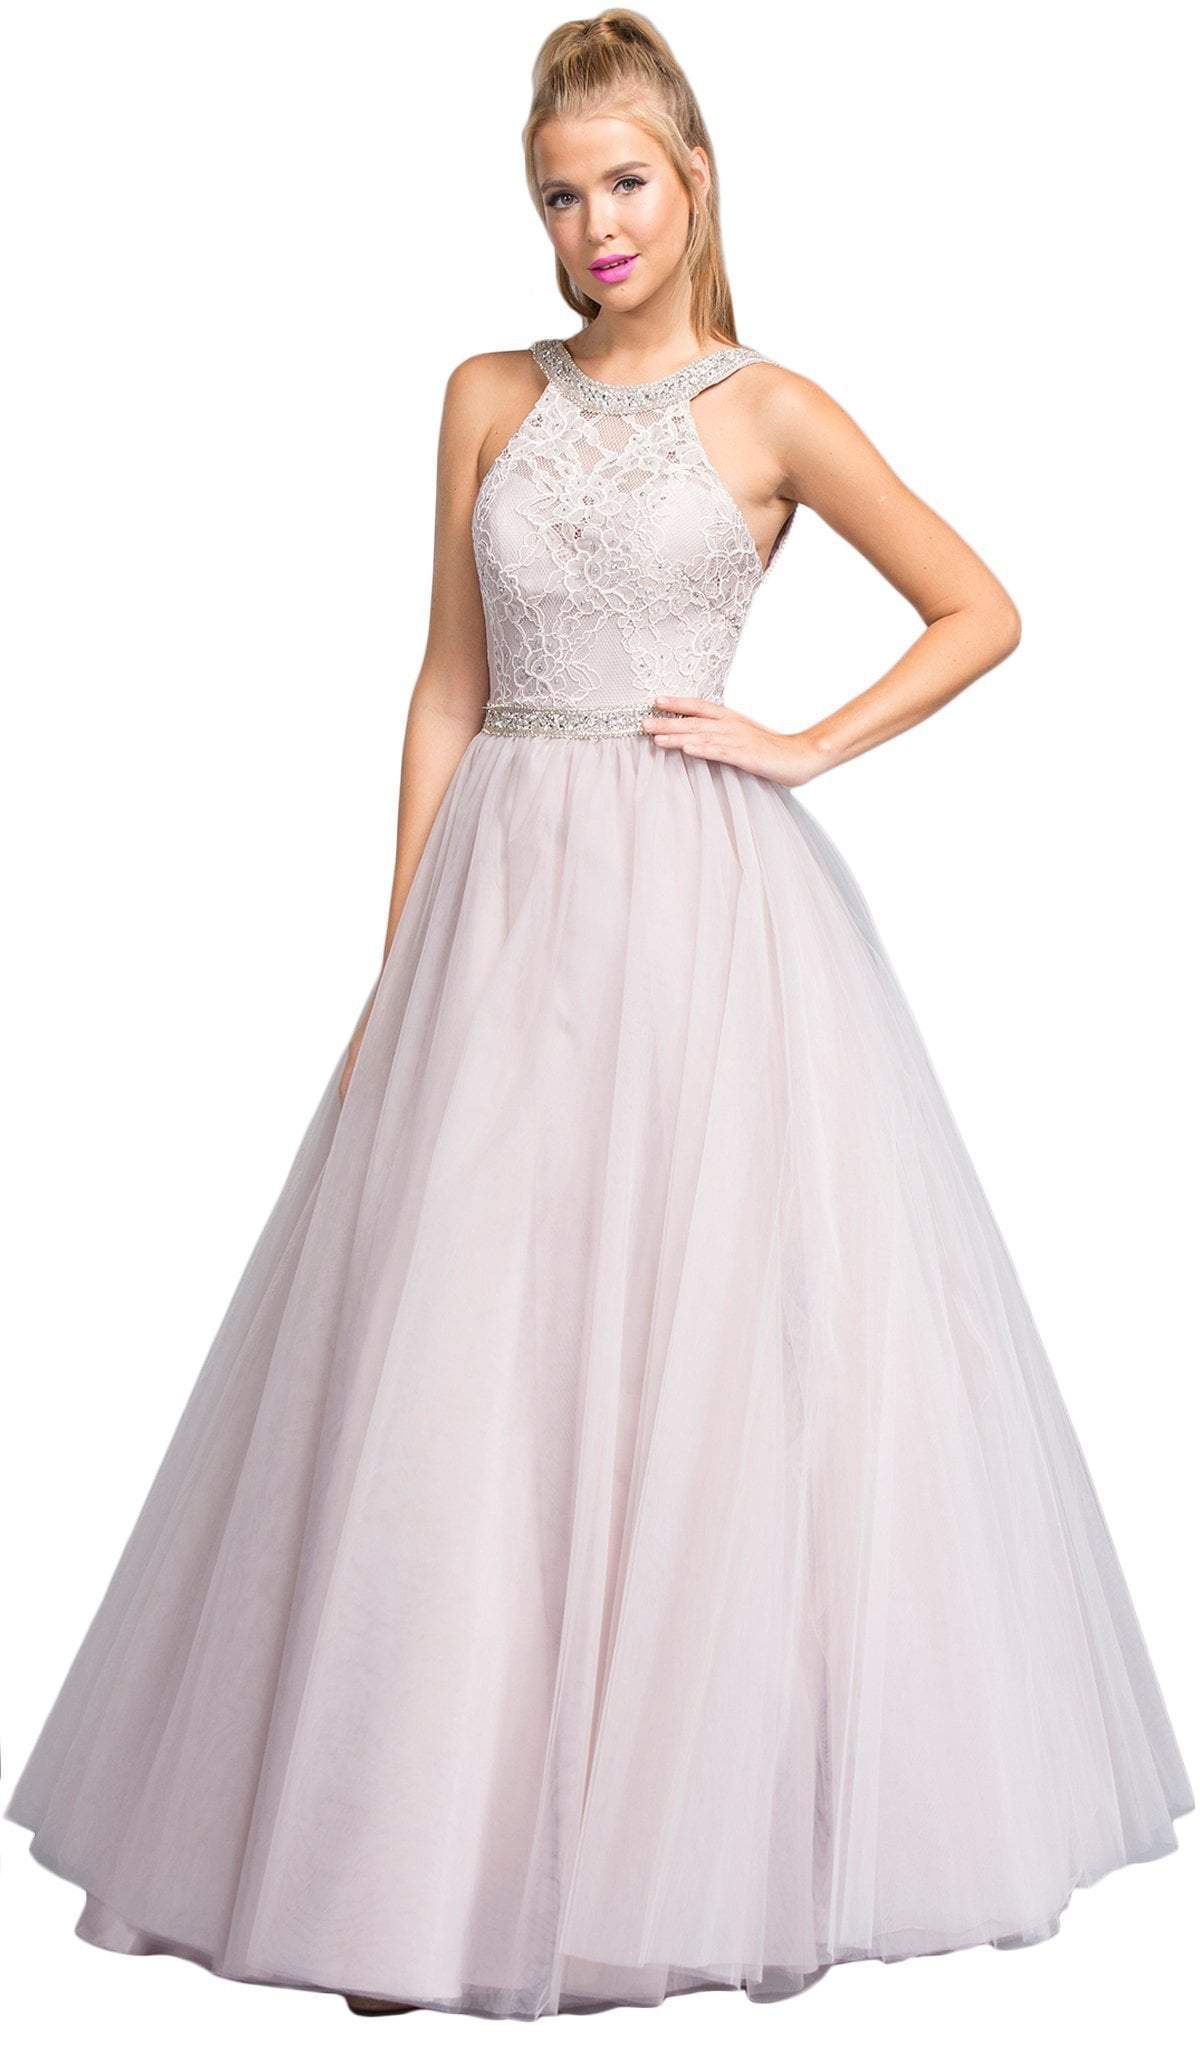 Image of Aspeed Design - Jeweled Lace Halter Prom Ballgown